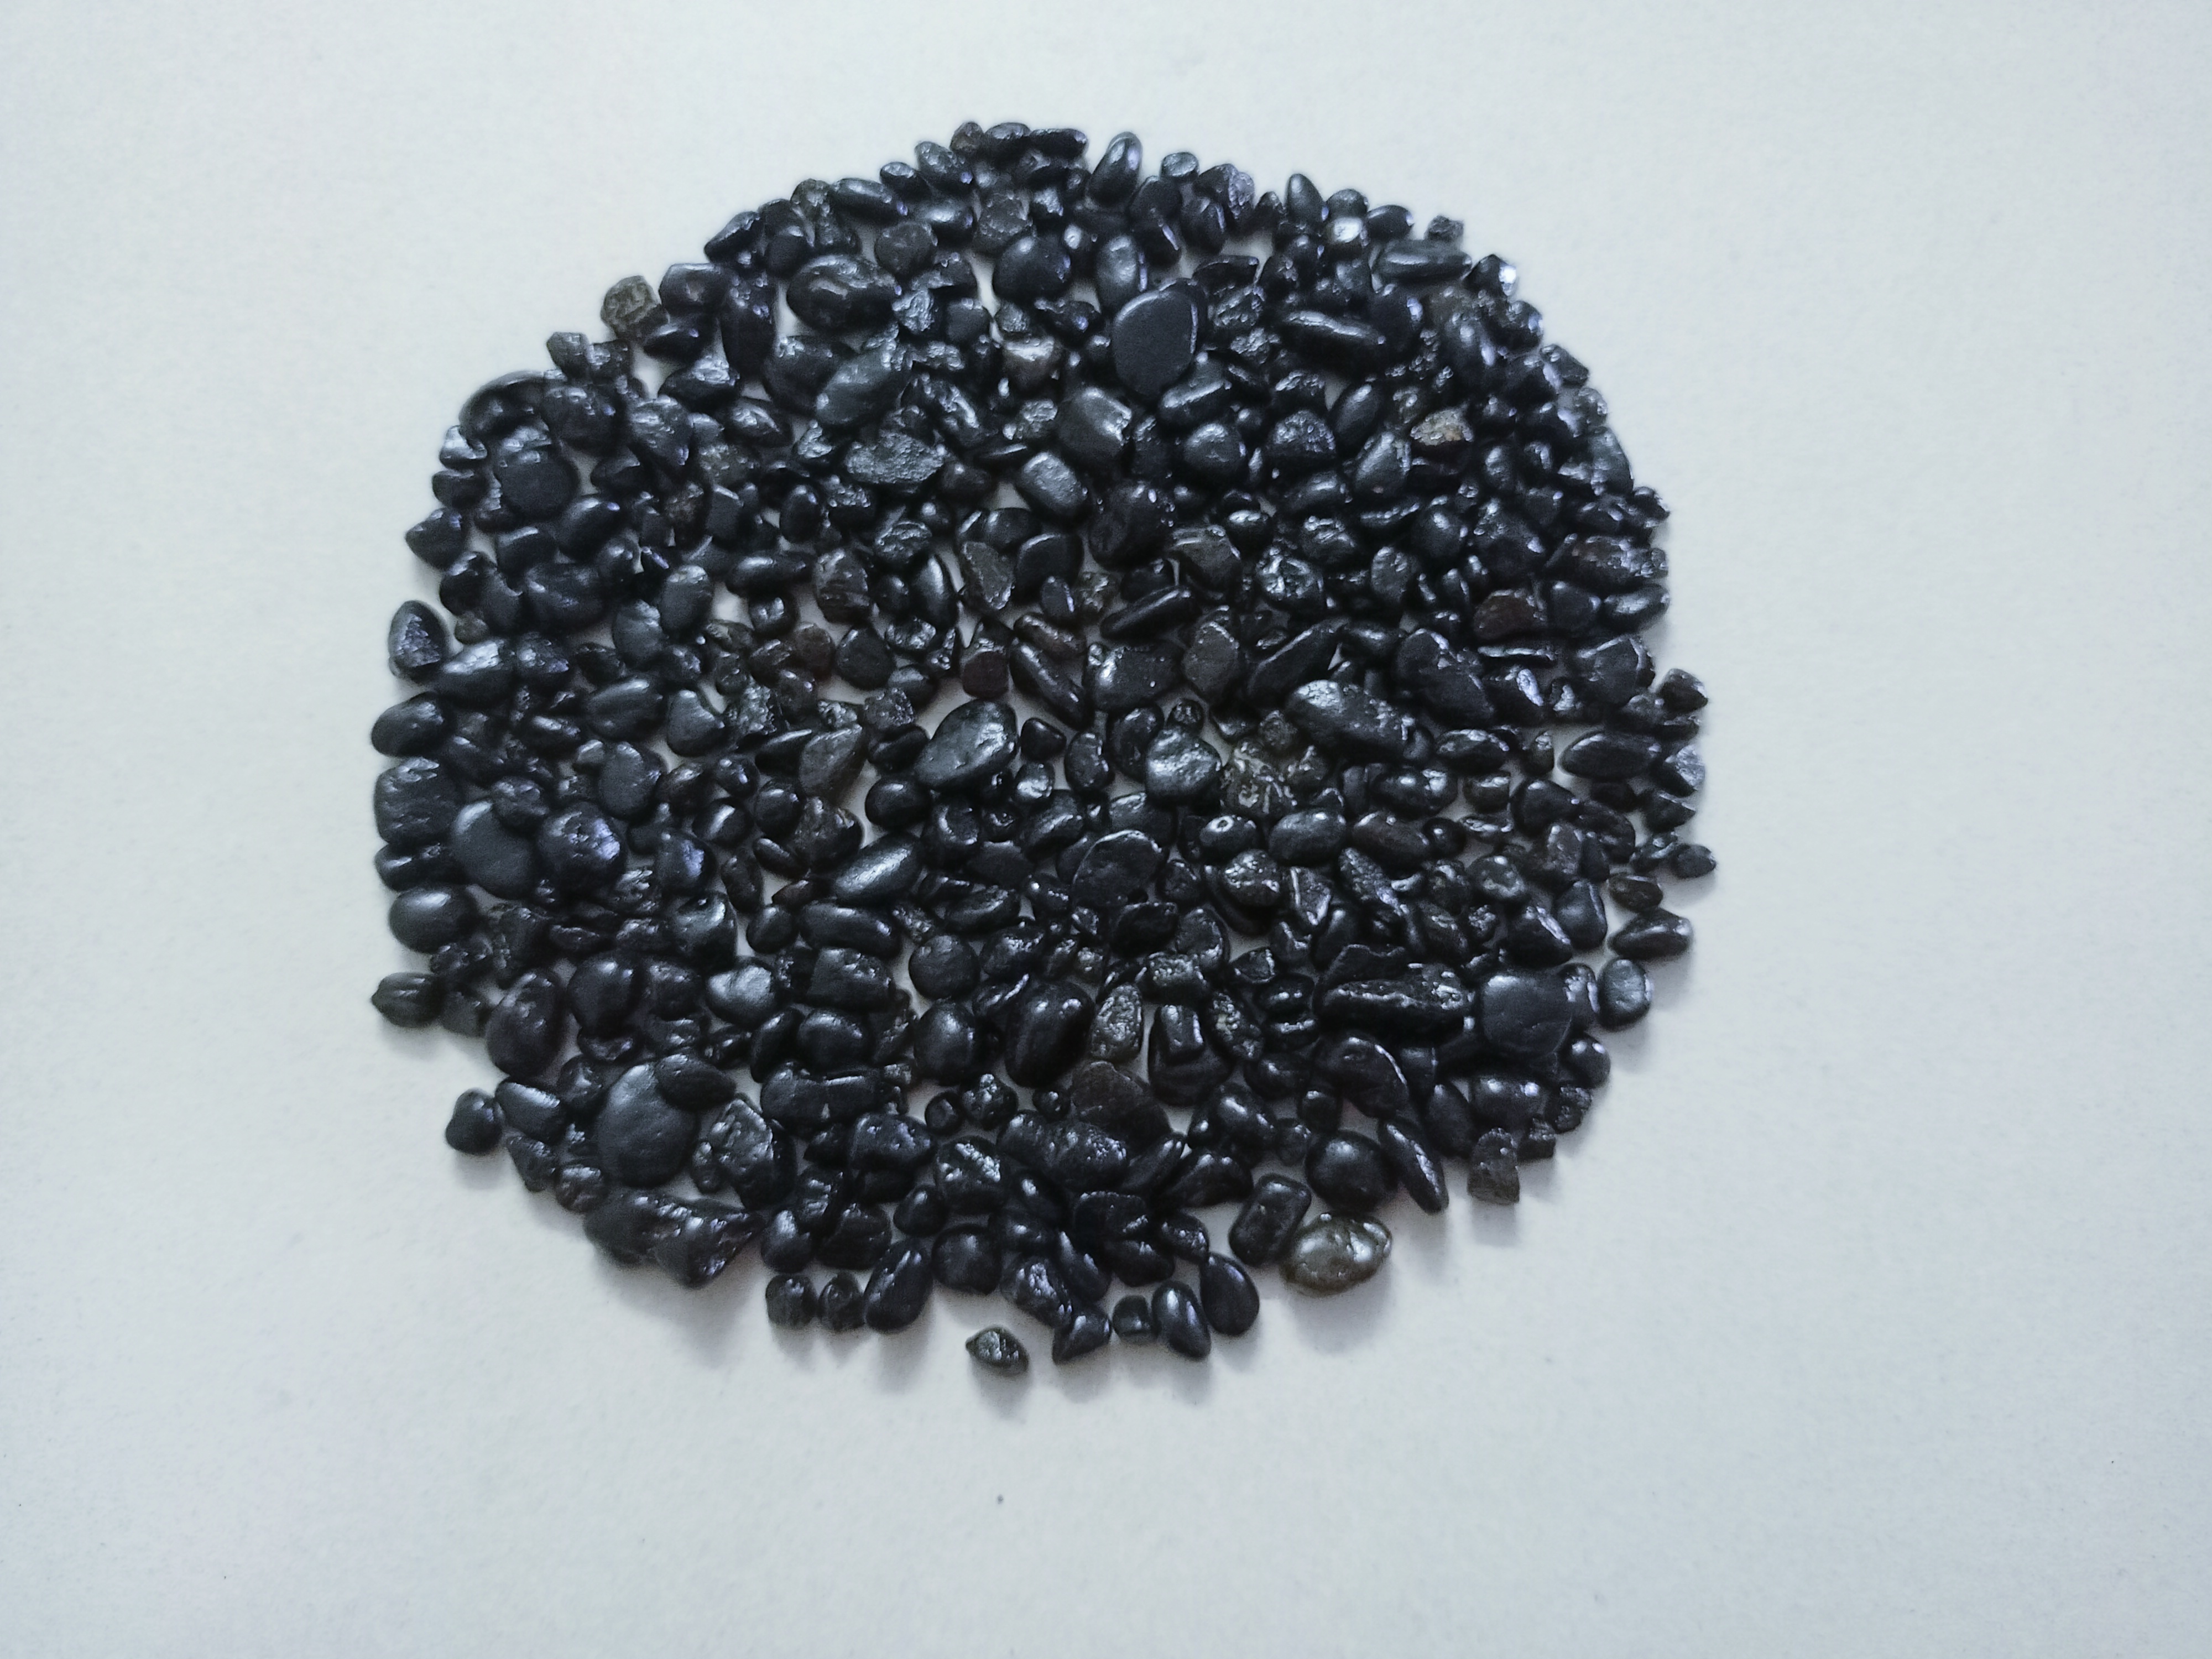 Color dark green GRAVELS Resin bound natural gravel epoxy coating pebbles for swimming pool and water filteration tritment